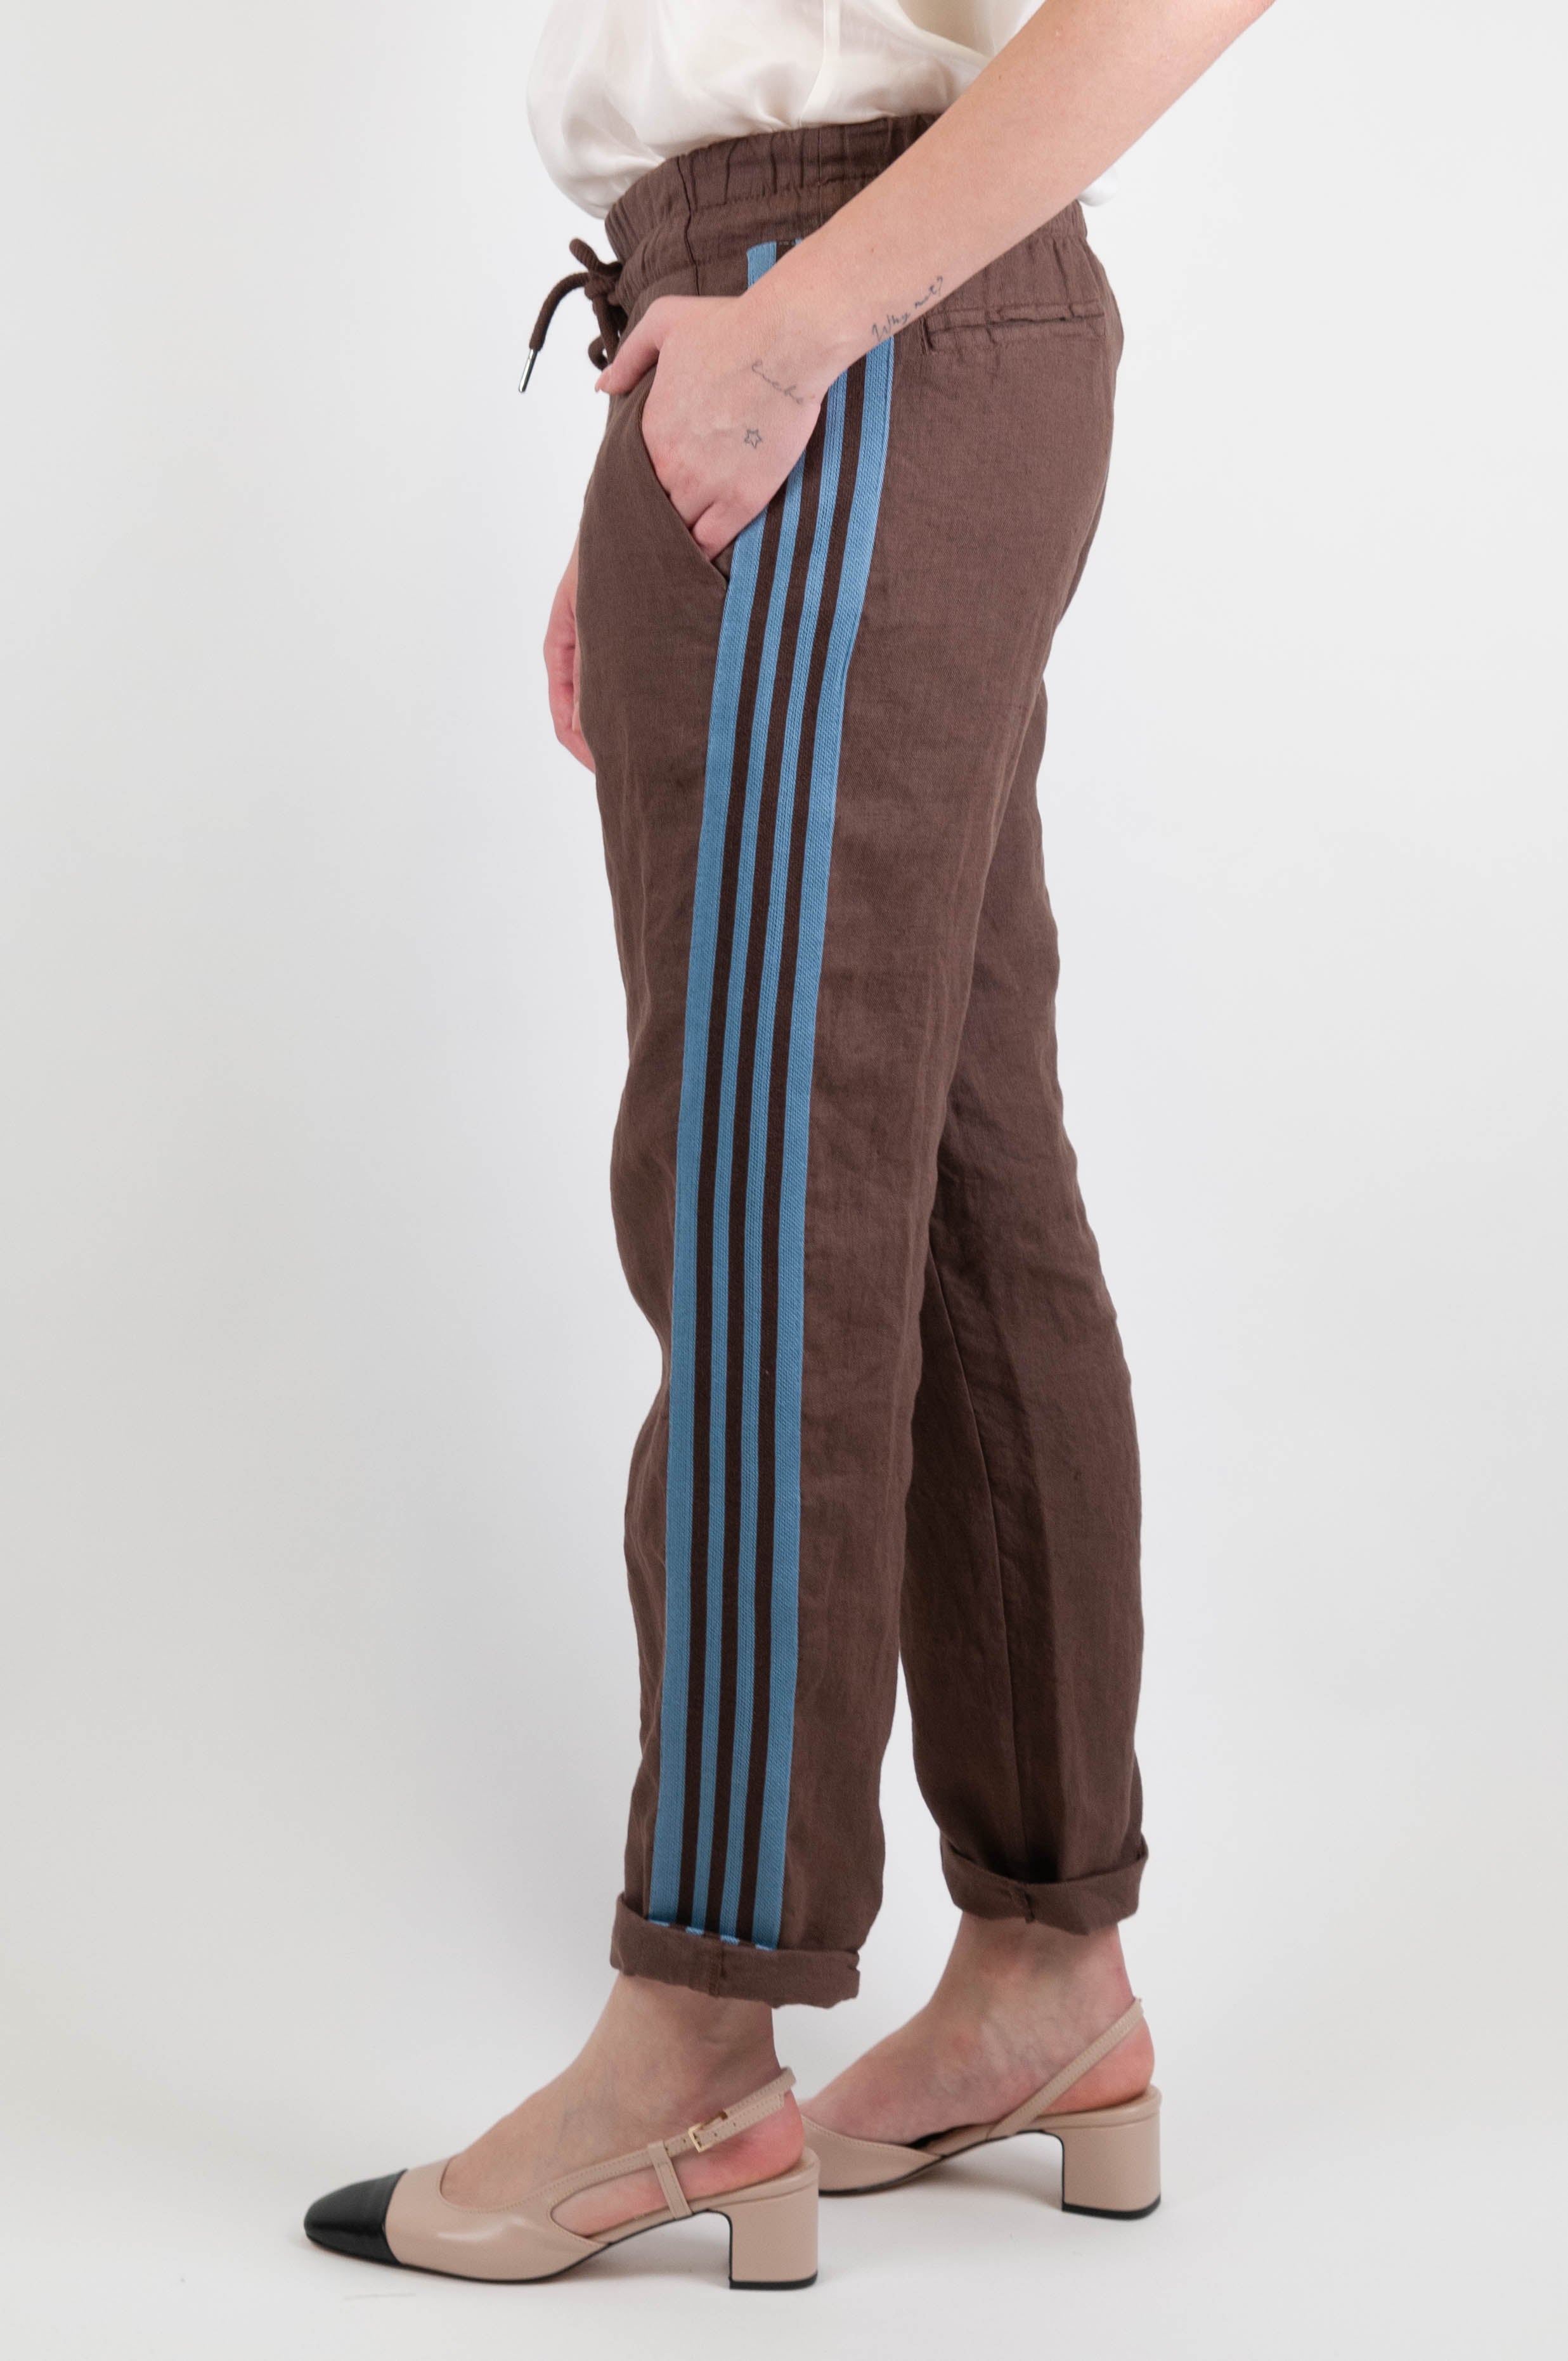 Motel - Linen trousers with drawstring and contrasting side band